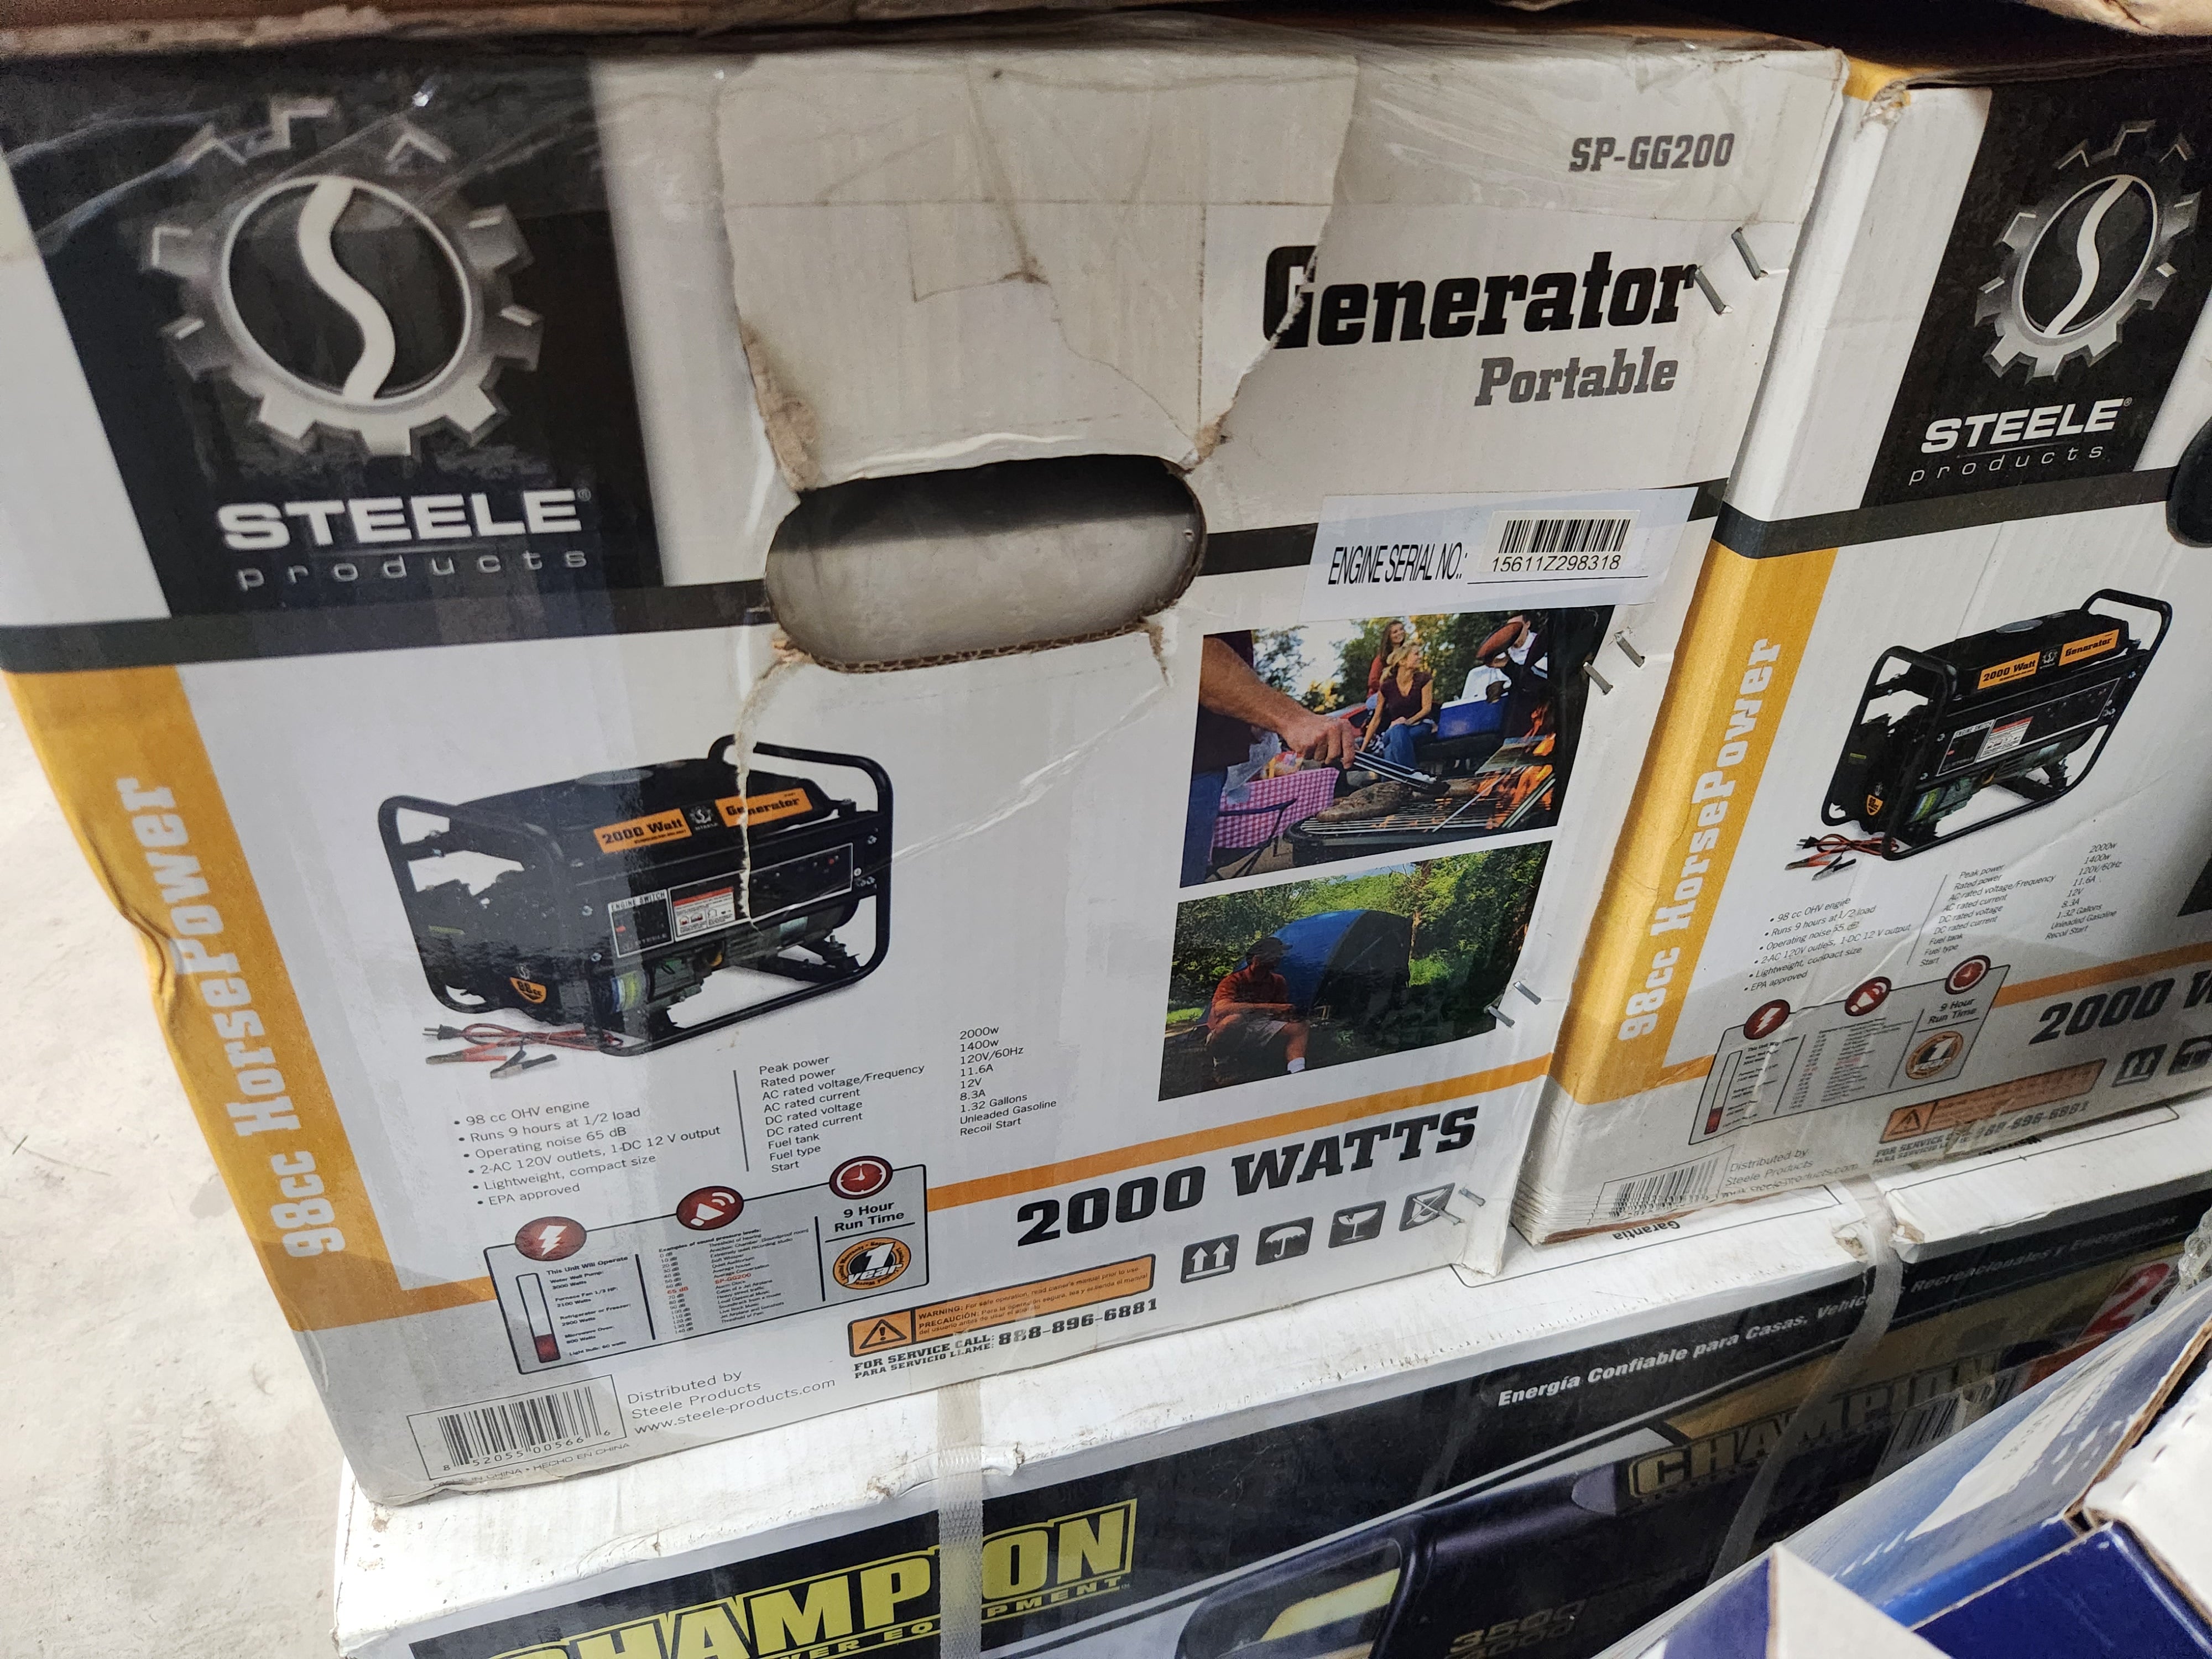 Steele Products Generator Portable - SP-GG200